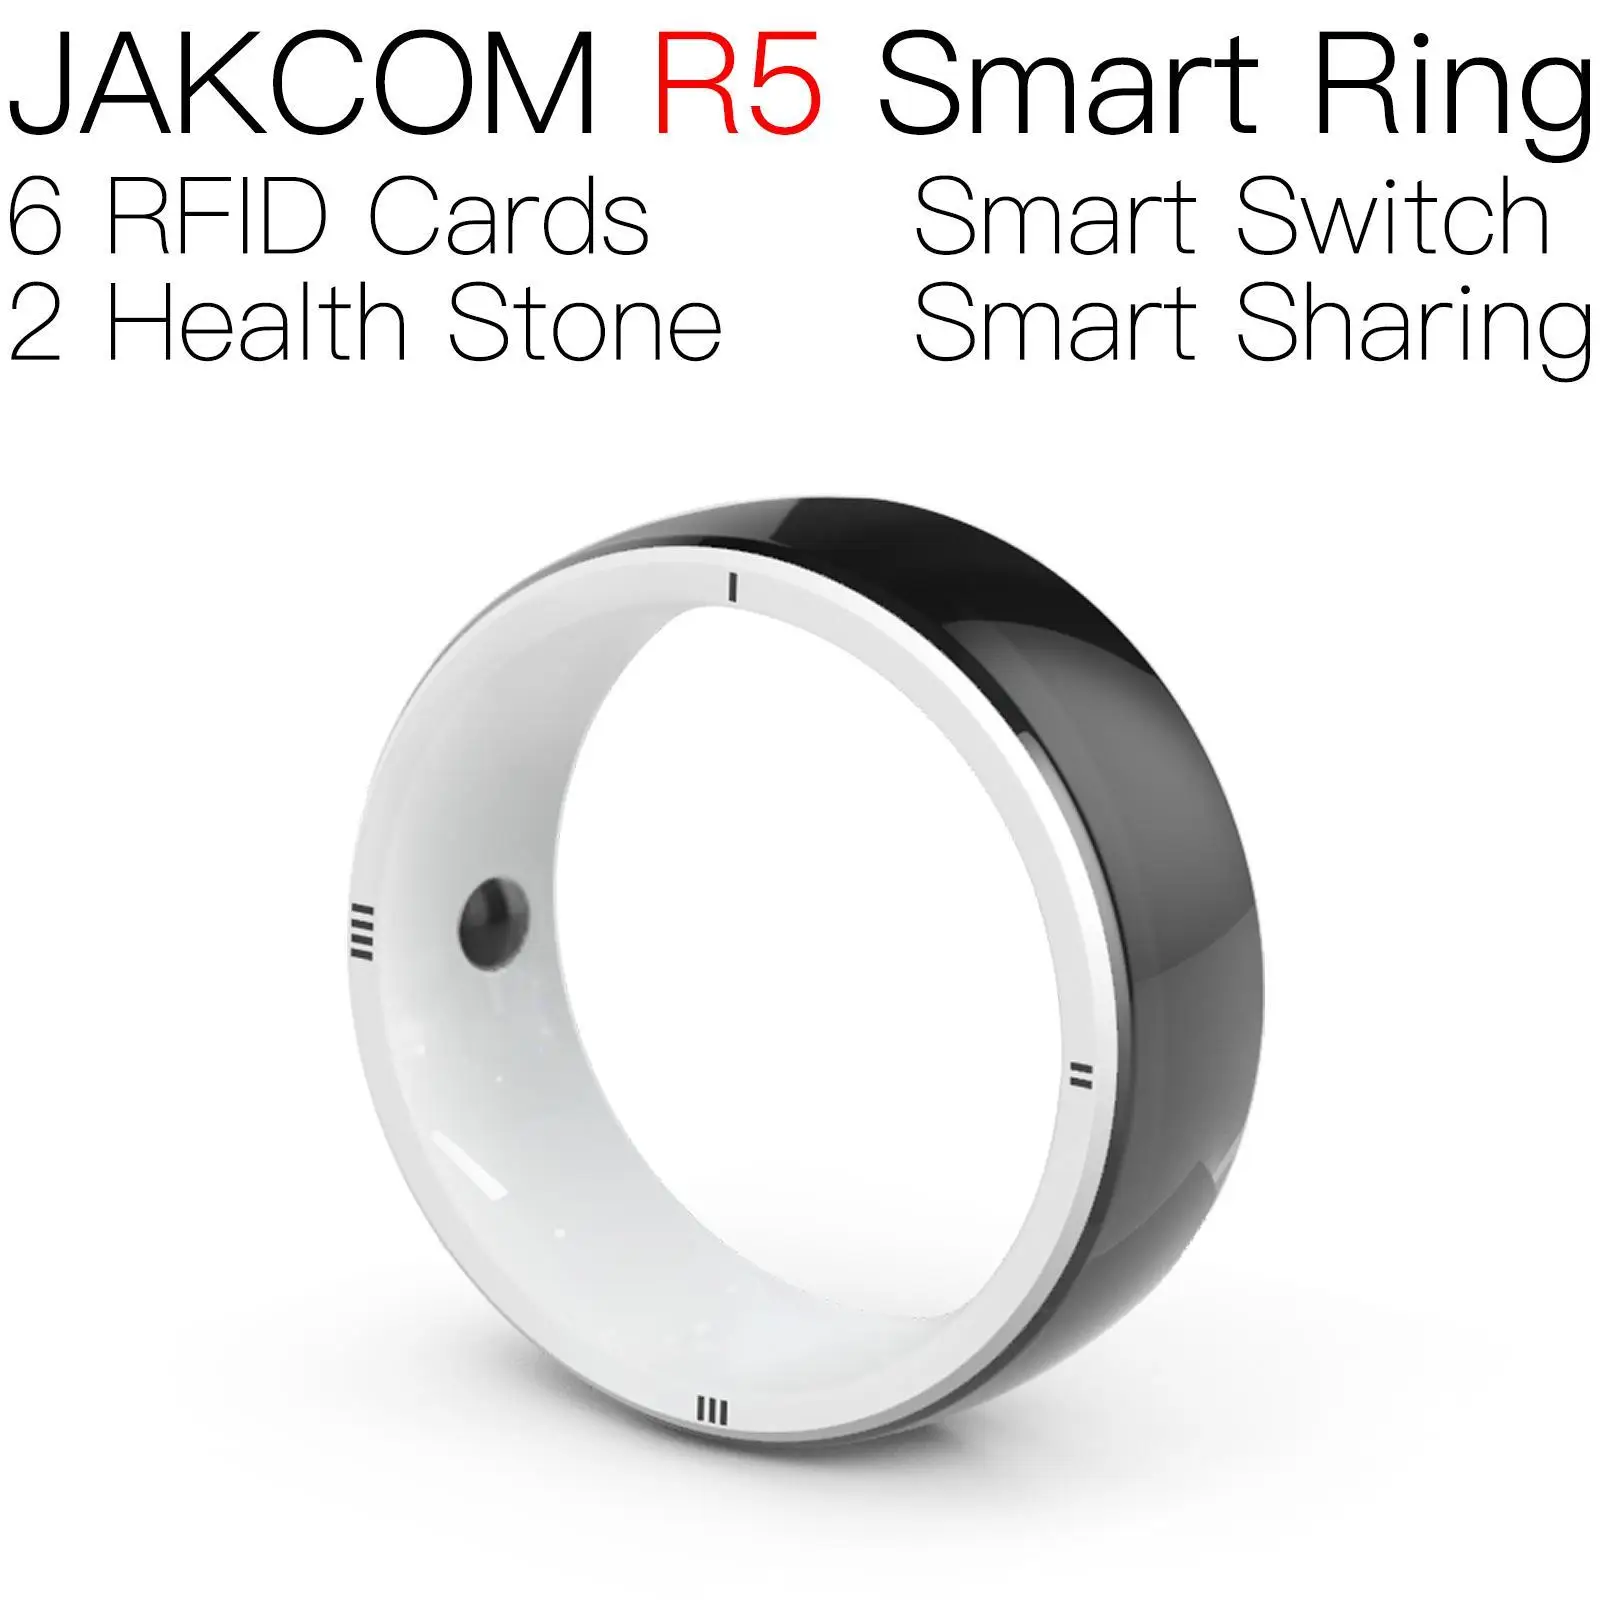 

JAKCOM R5 Smart Ring New arrival as m5 band monst doll dropshipping brasil hk8 max 7 nfs global version fit watch 1s